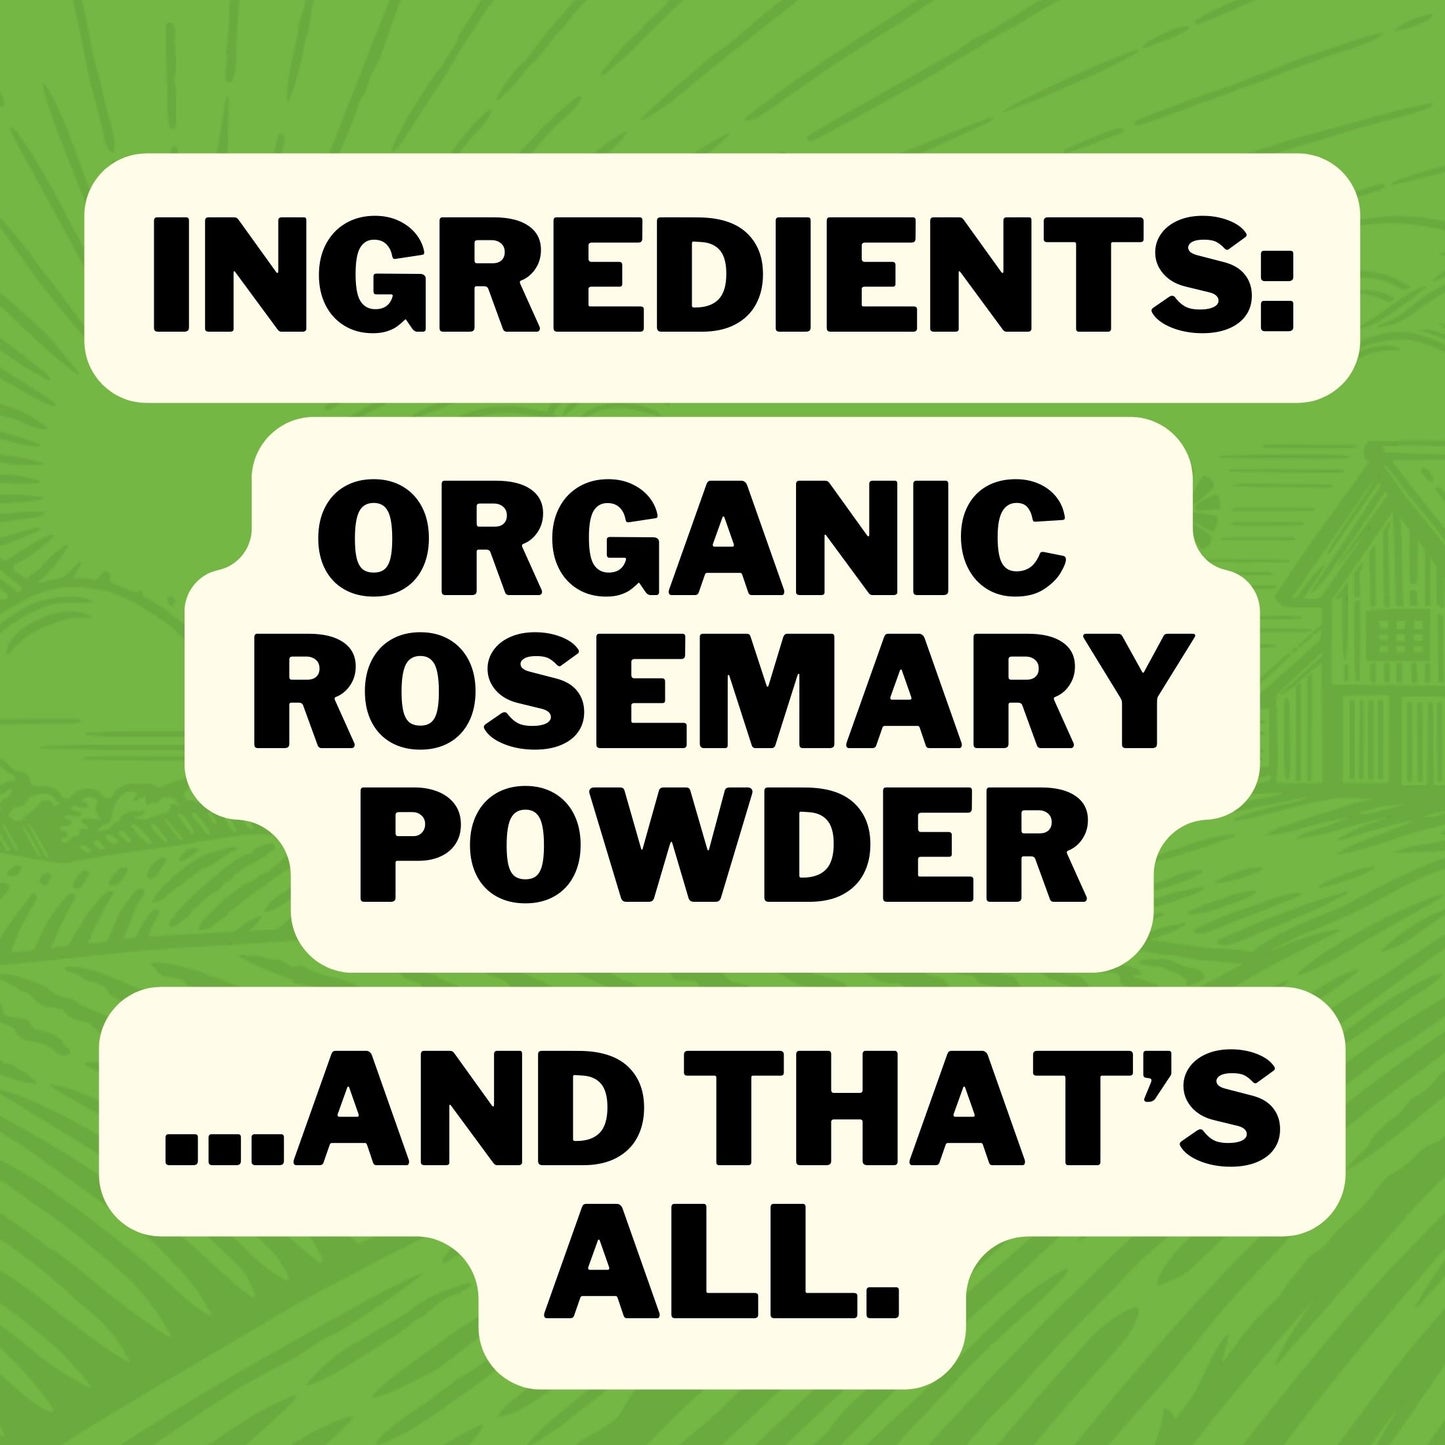 Ingredients : Organic Rosemary Powder ... and that's all.